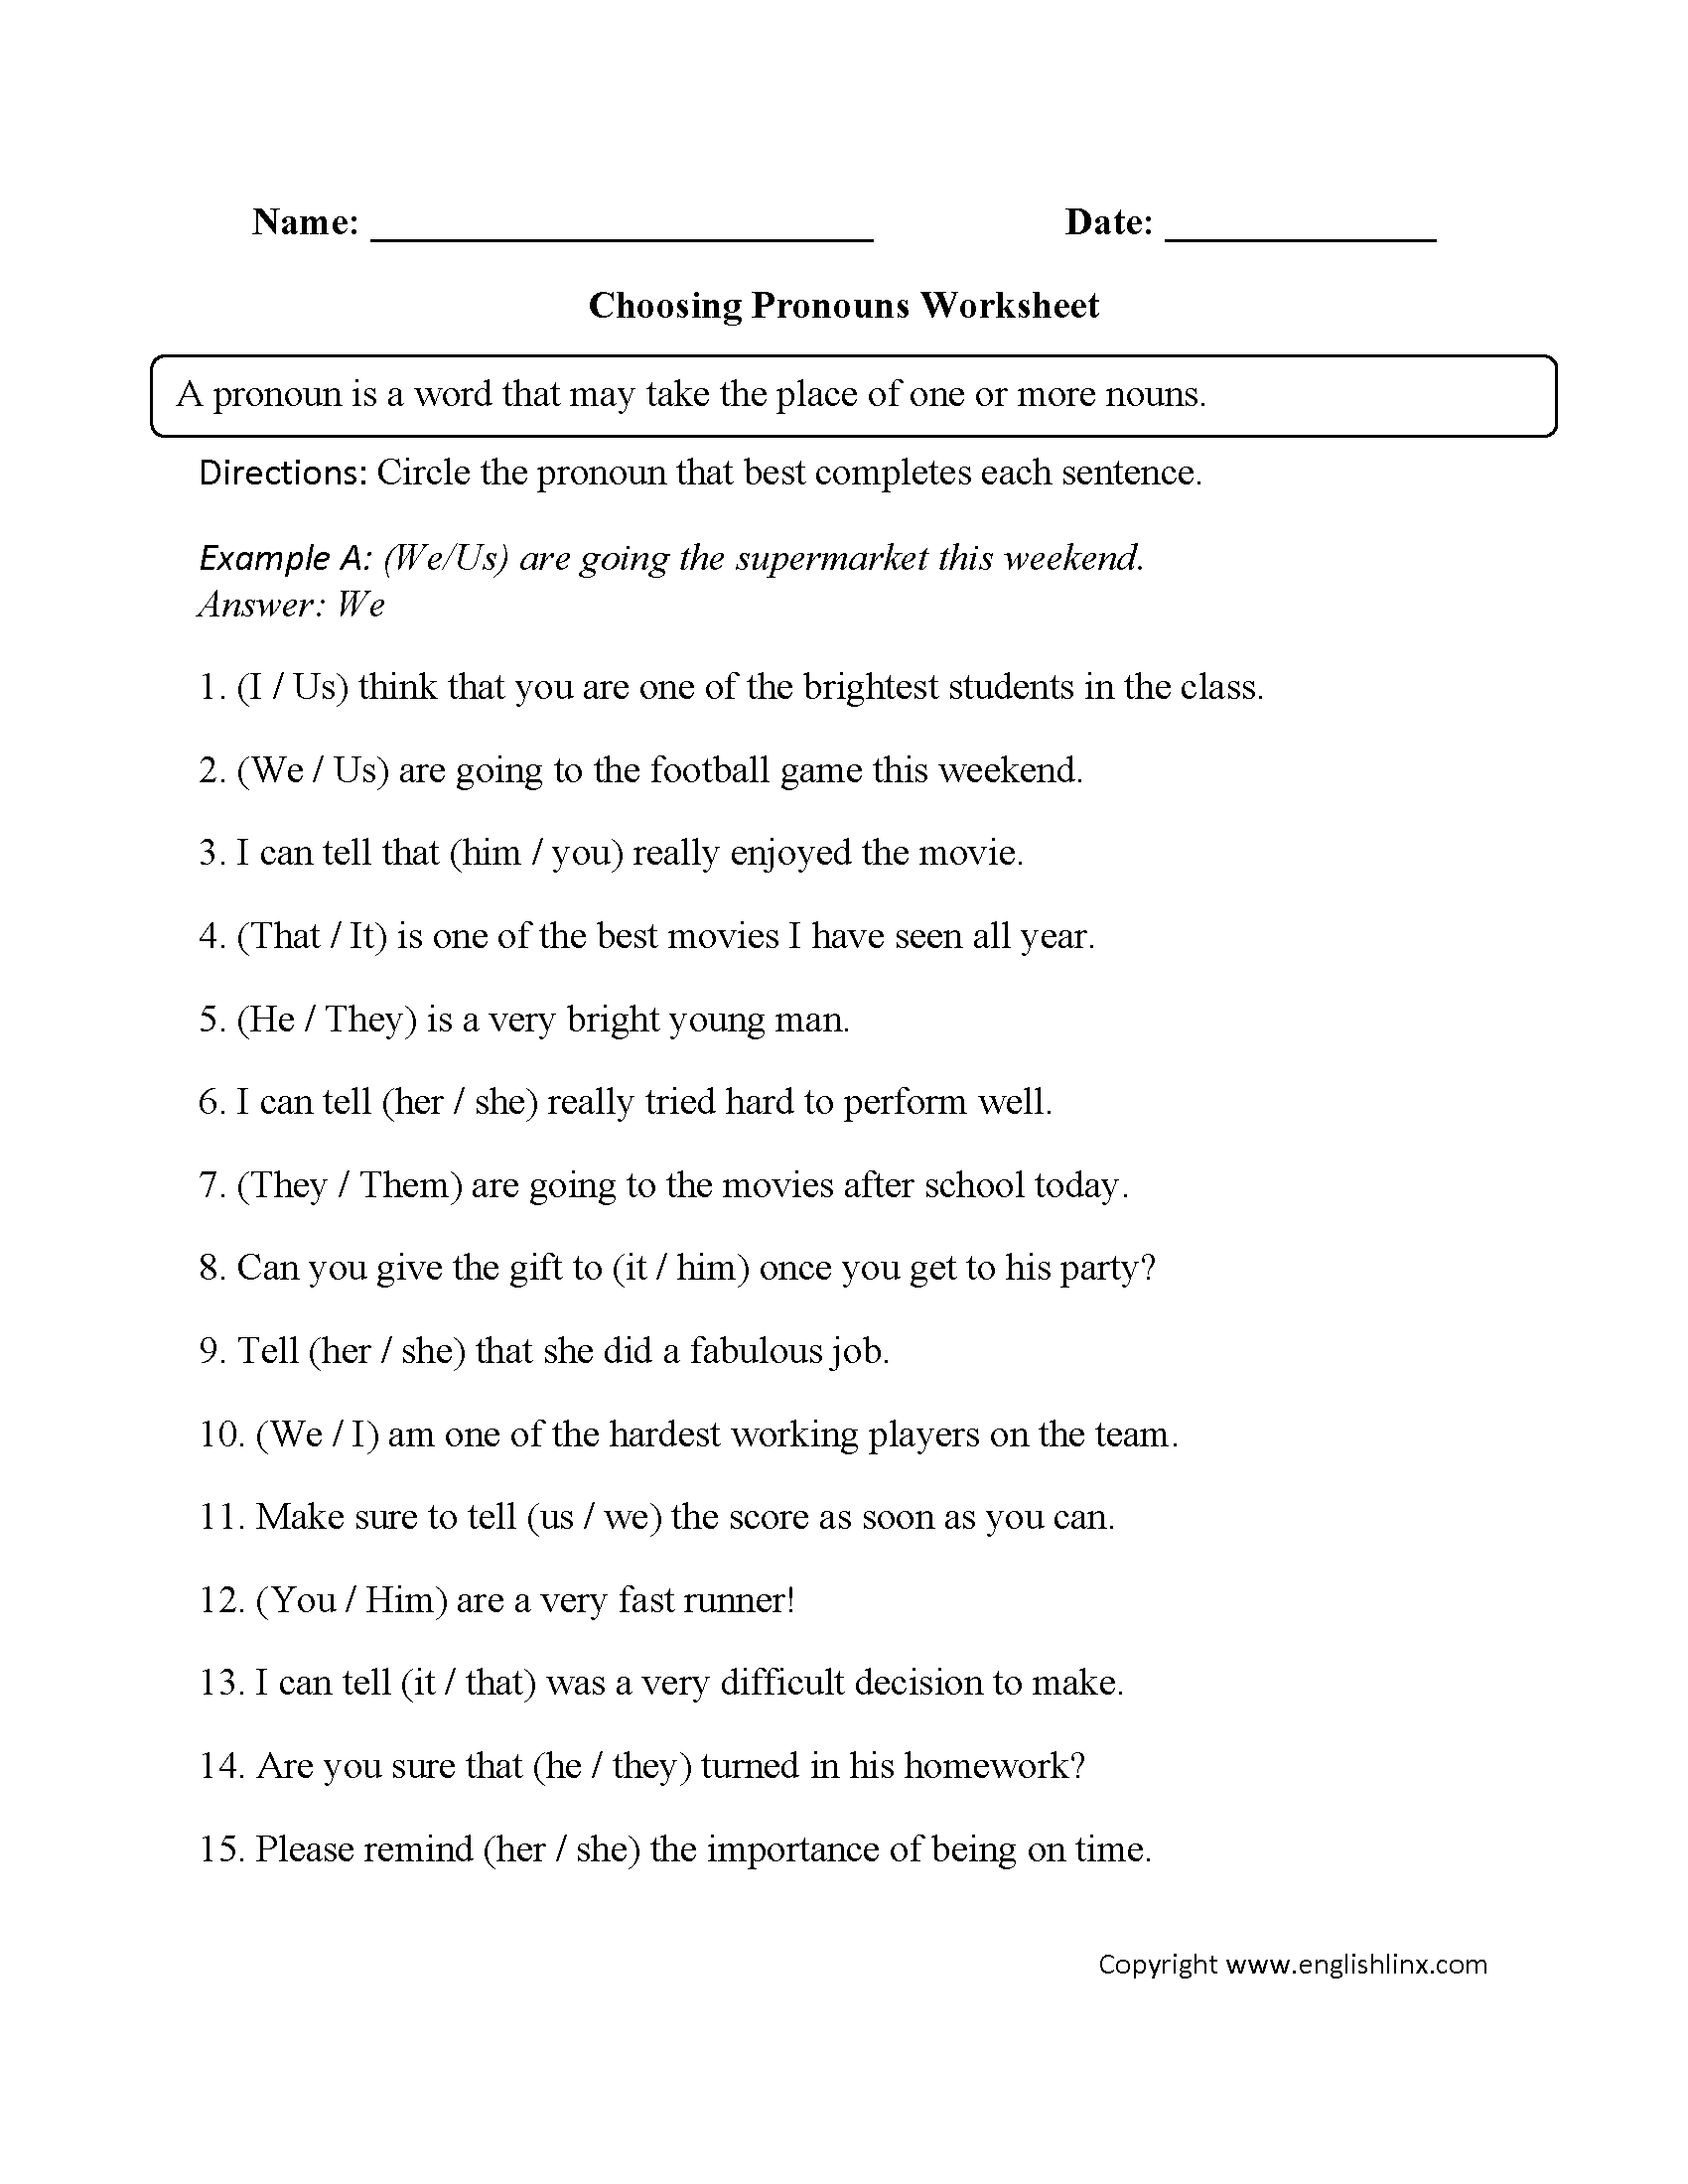 Making Pronouns Agree With Antecedents Worksheet